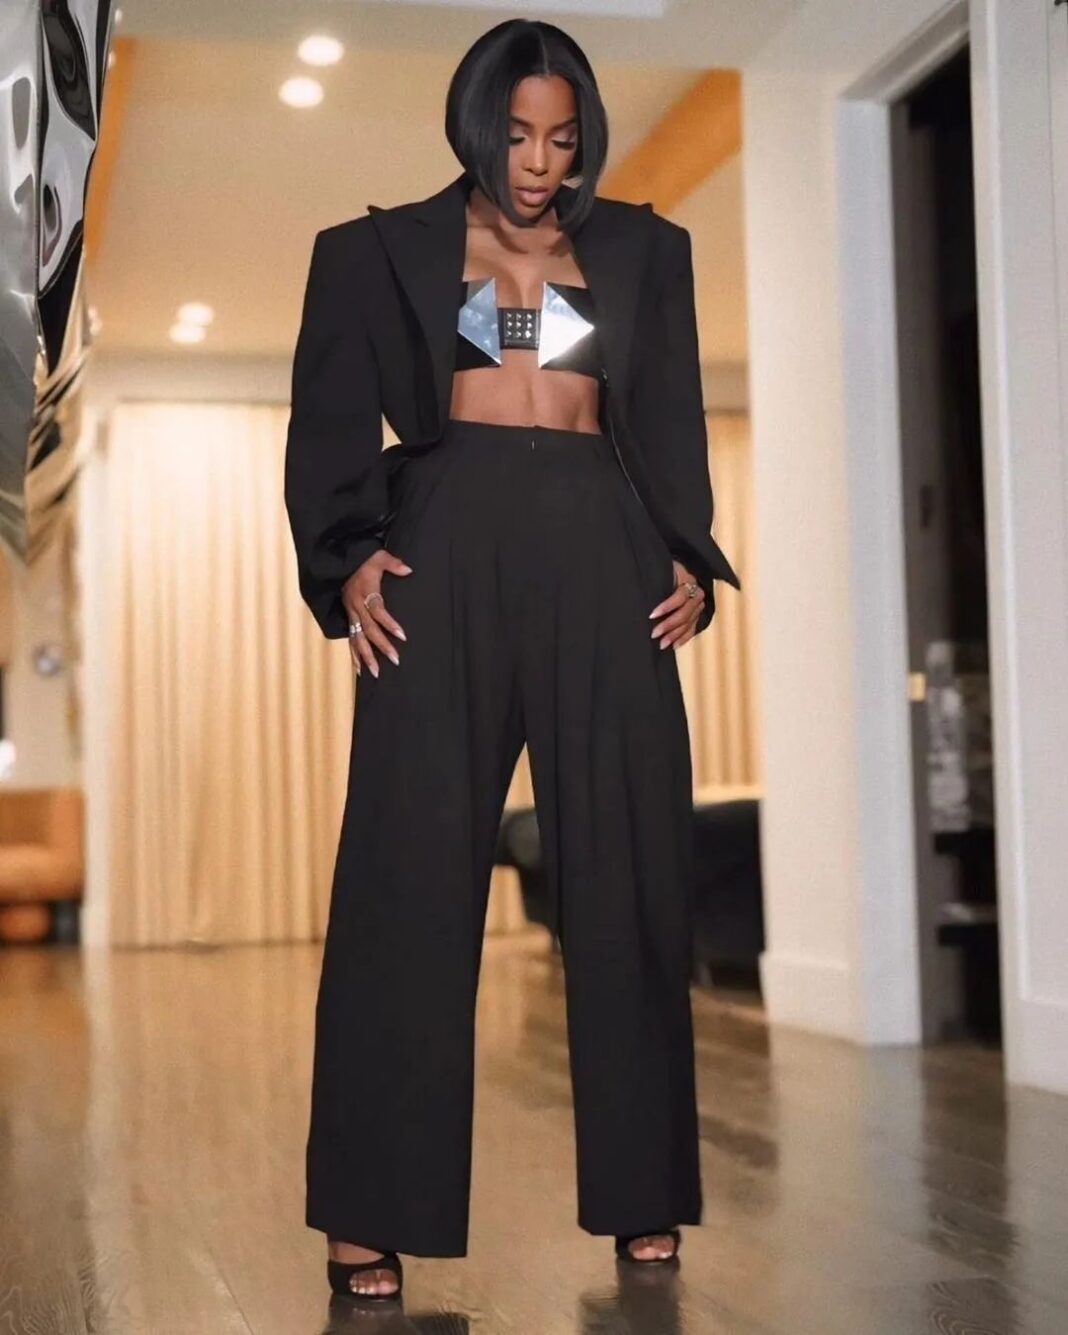 Kelly Rowland Wore a Black Giuseppe Di Morabito Look with a Metal Ashton Michael Bra and Black Ricagno Heels